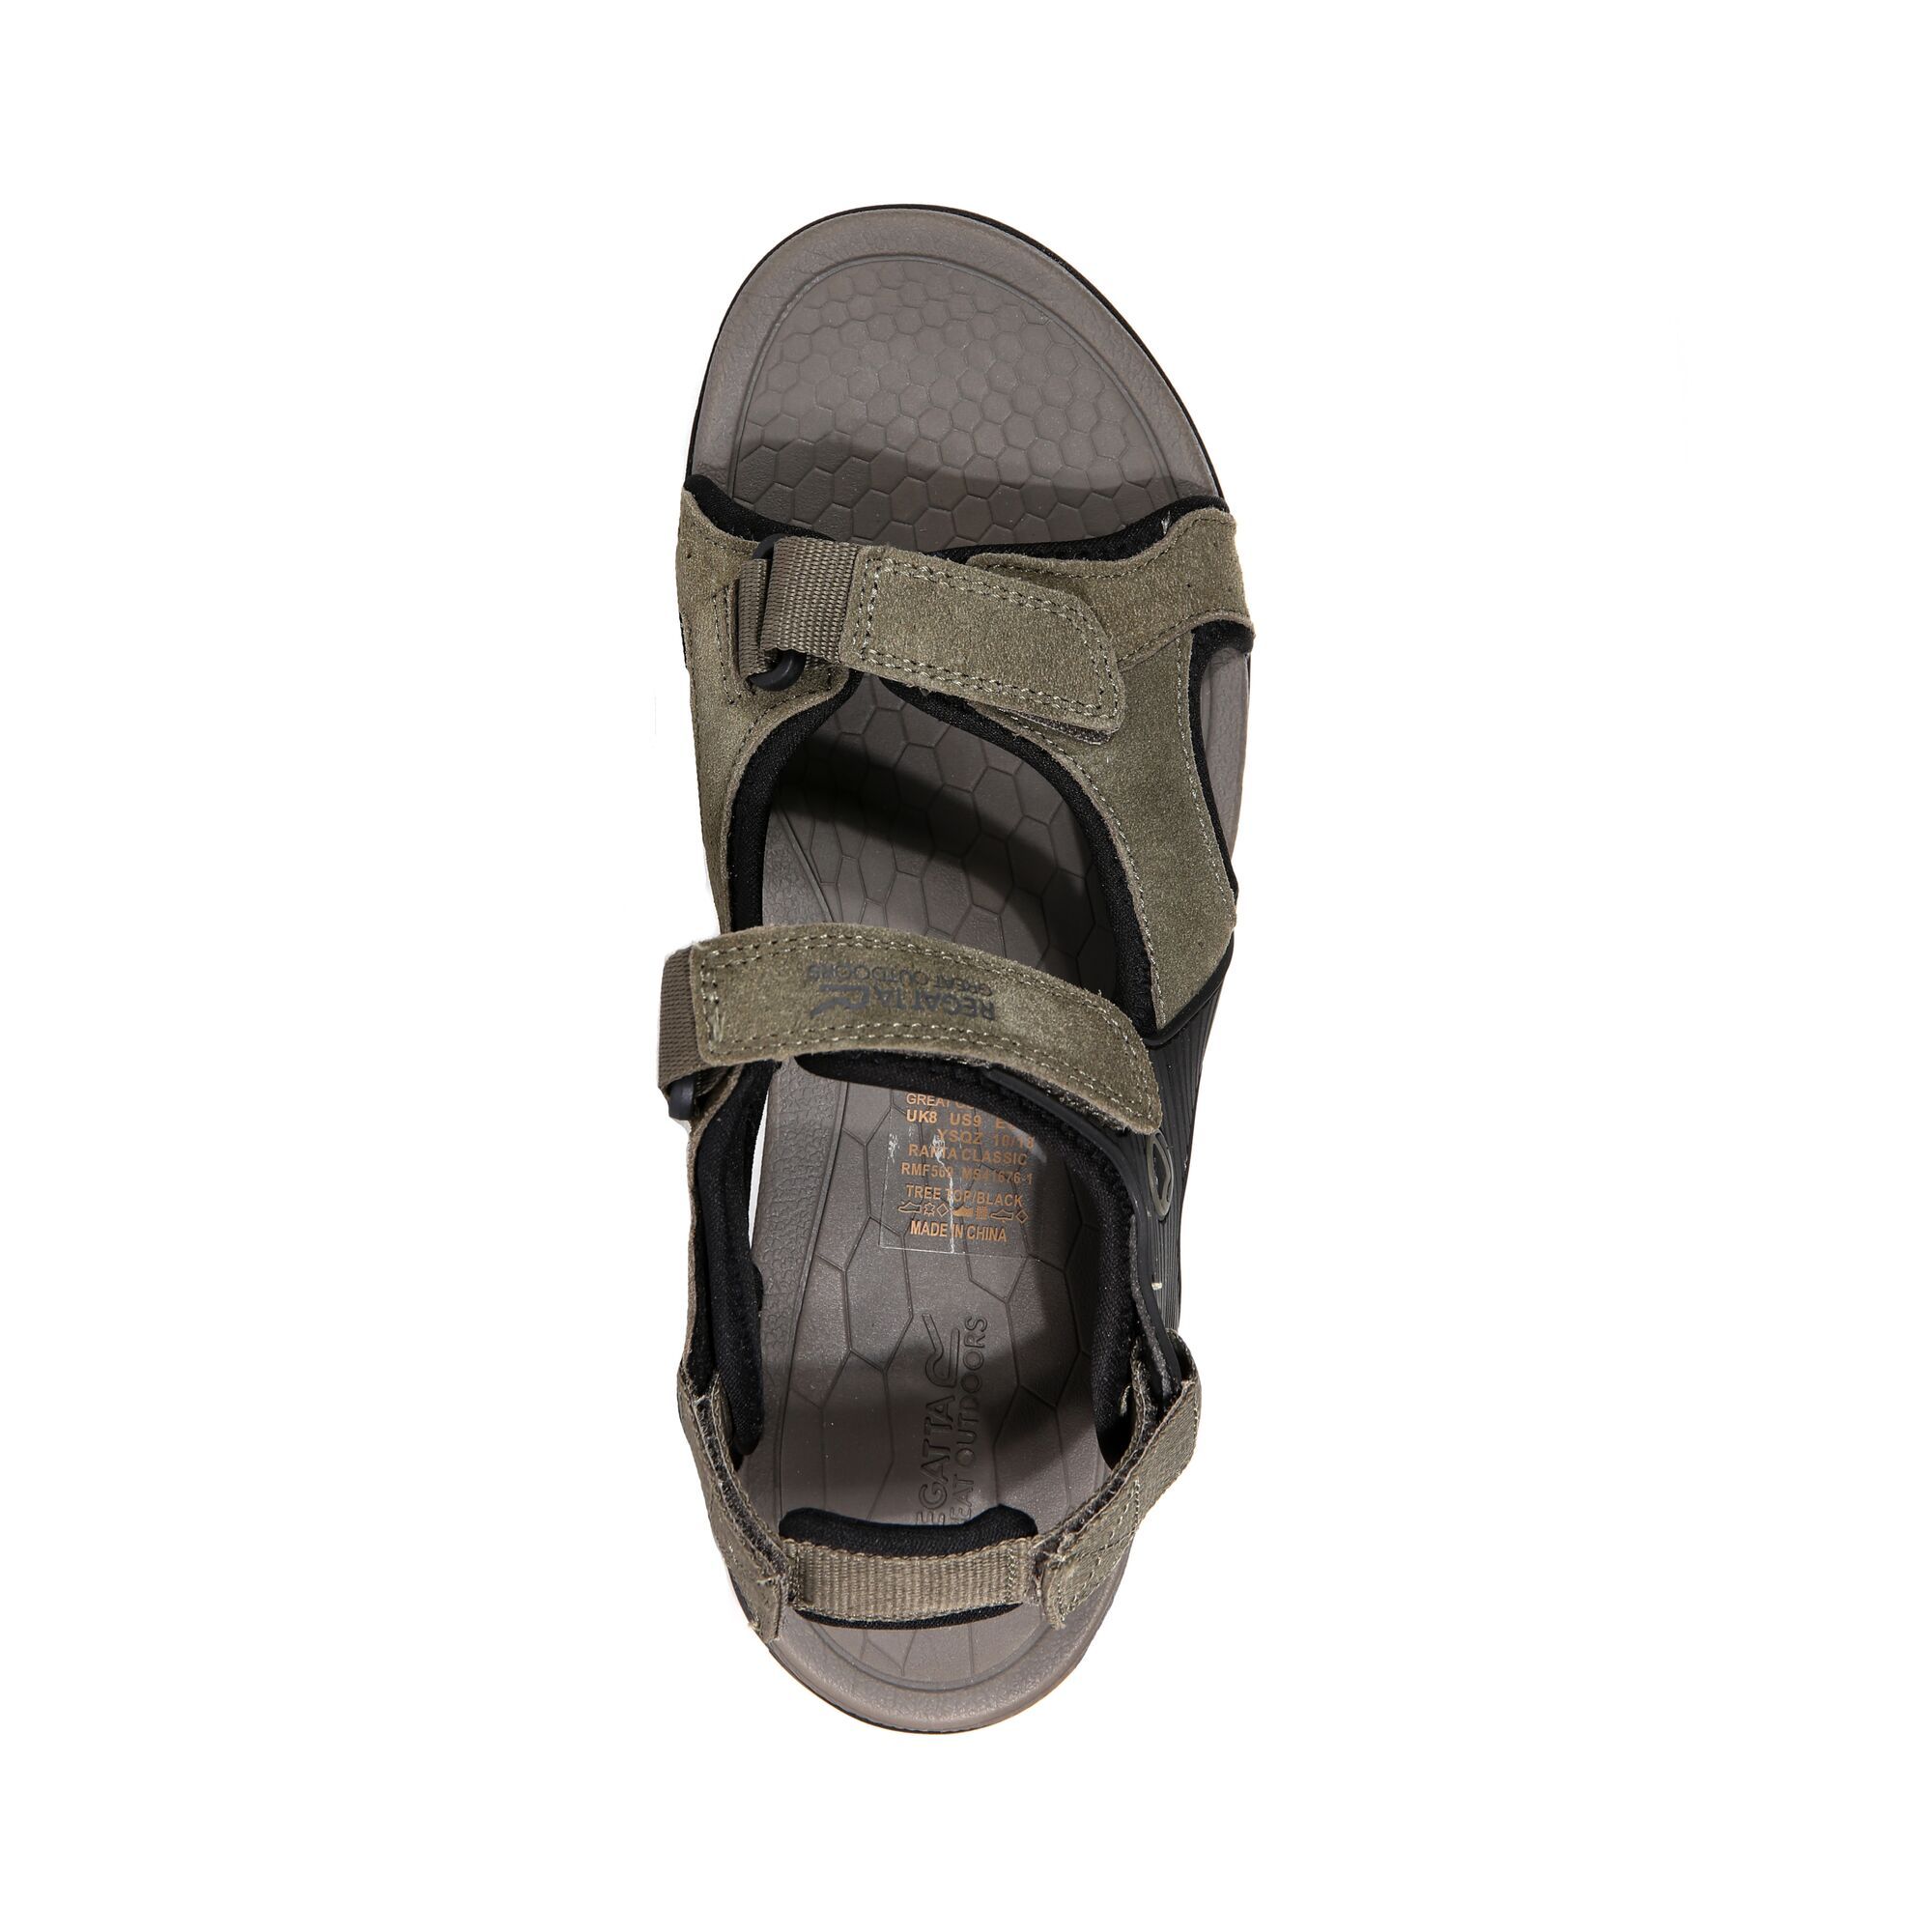 75% Suede, 15% Rubber, 10% Polyester. Rafta Classic sandal delivers friction-free comfort and support. Neoprene backed suede hugs the foot with three points of adjustment while moulded rubber stabilises and protects. EVA cushioning and a durable rubber outsole make sure you cruise through the day.